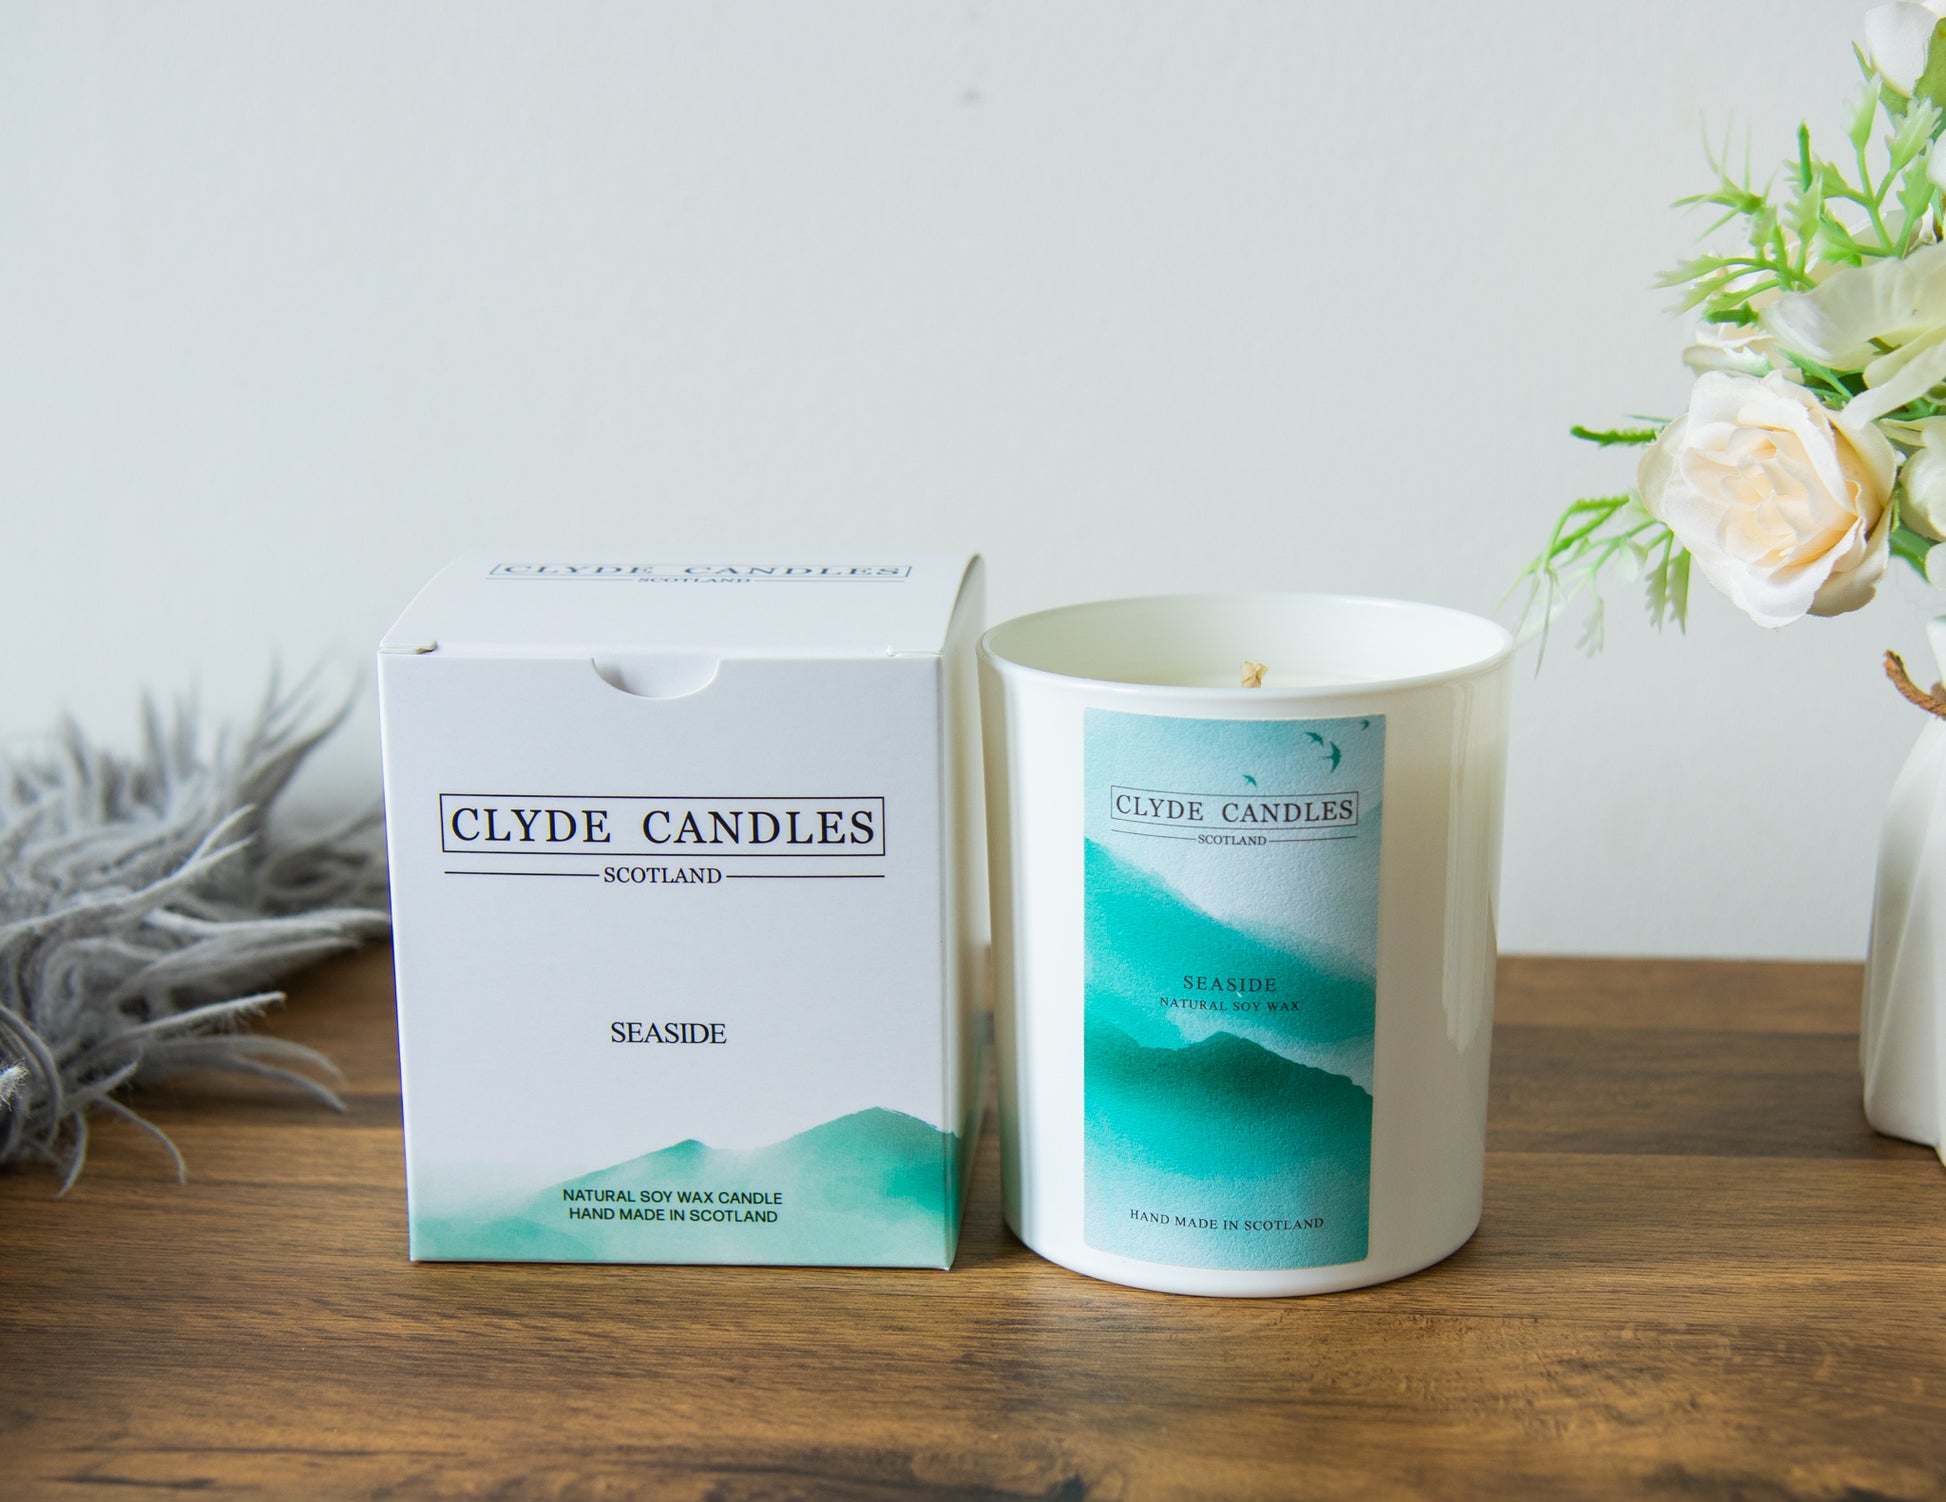 seaside gift box natural soy candle, scottish brittish gifts, made by clyde candles